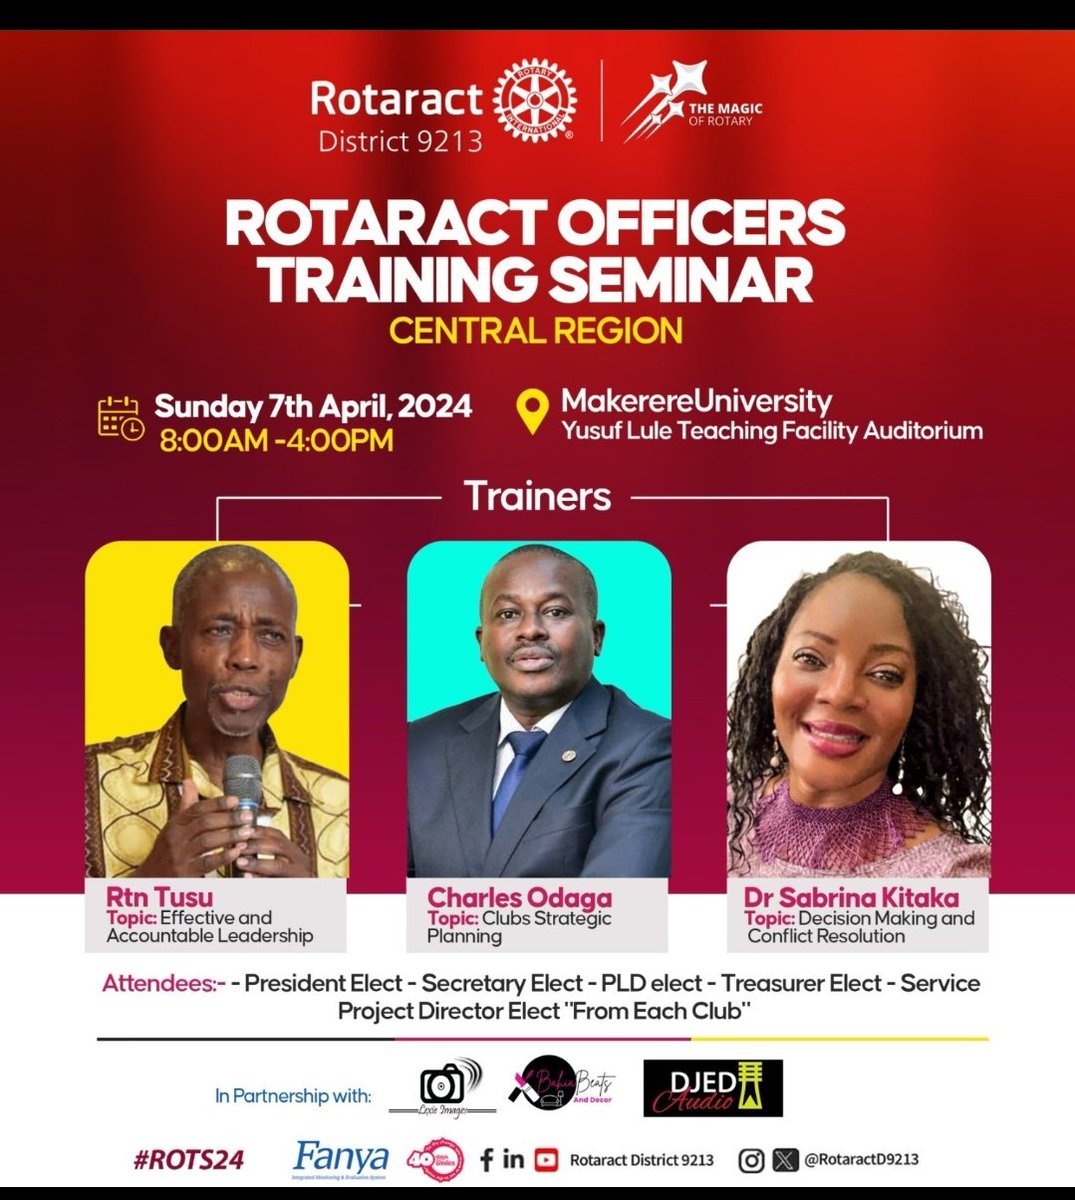 _Join us on April 7th to unlock your leadership potential, network with like-minded individuals, and make a lasting impact in your Rotaract club and community._ @KihumuroLotson @Pius_O_Theo *#ROTSCENTRAL* *#ROTS24* PR RACBukoto @switzer_micheal